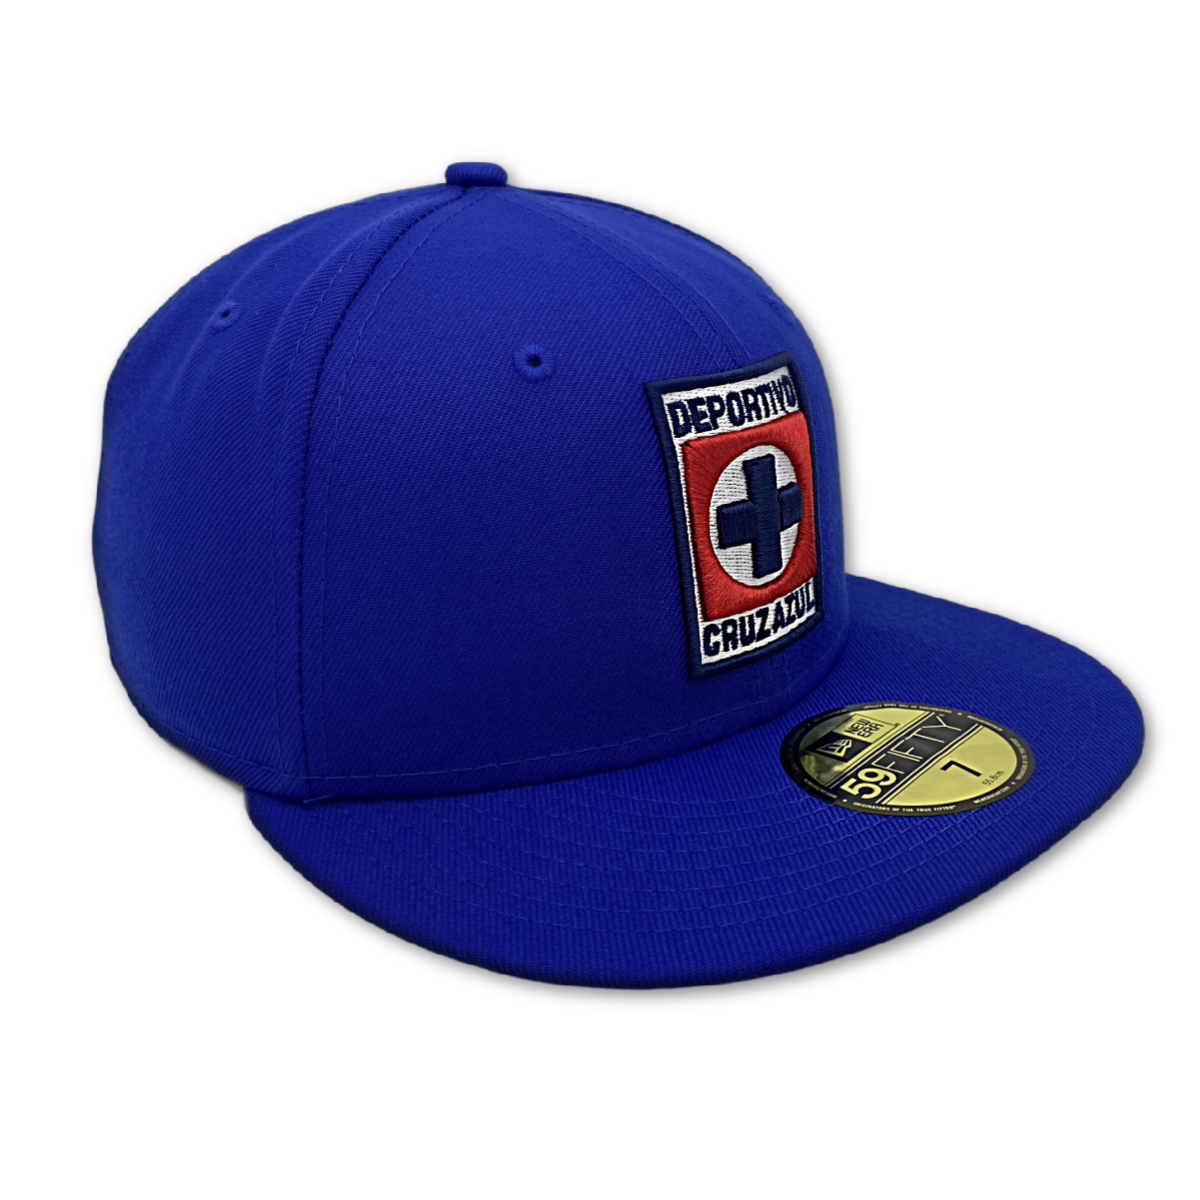 (AAAA) NEW ERA OFFICIAL CLUB CRUZ AZUL 59FIFTY FITTED HAT-ROYAL nvsoccer.com The Coliseum